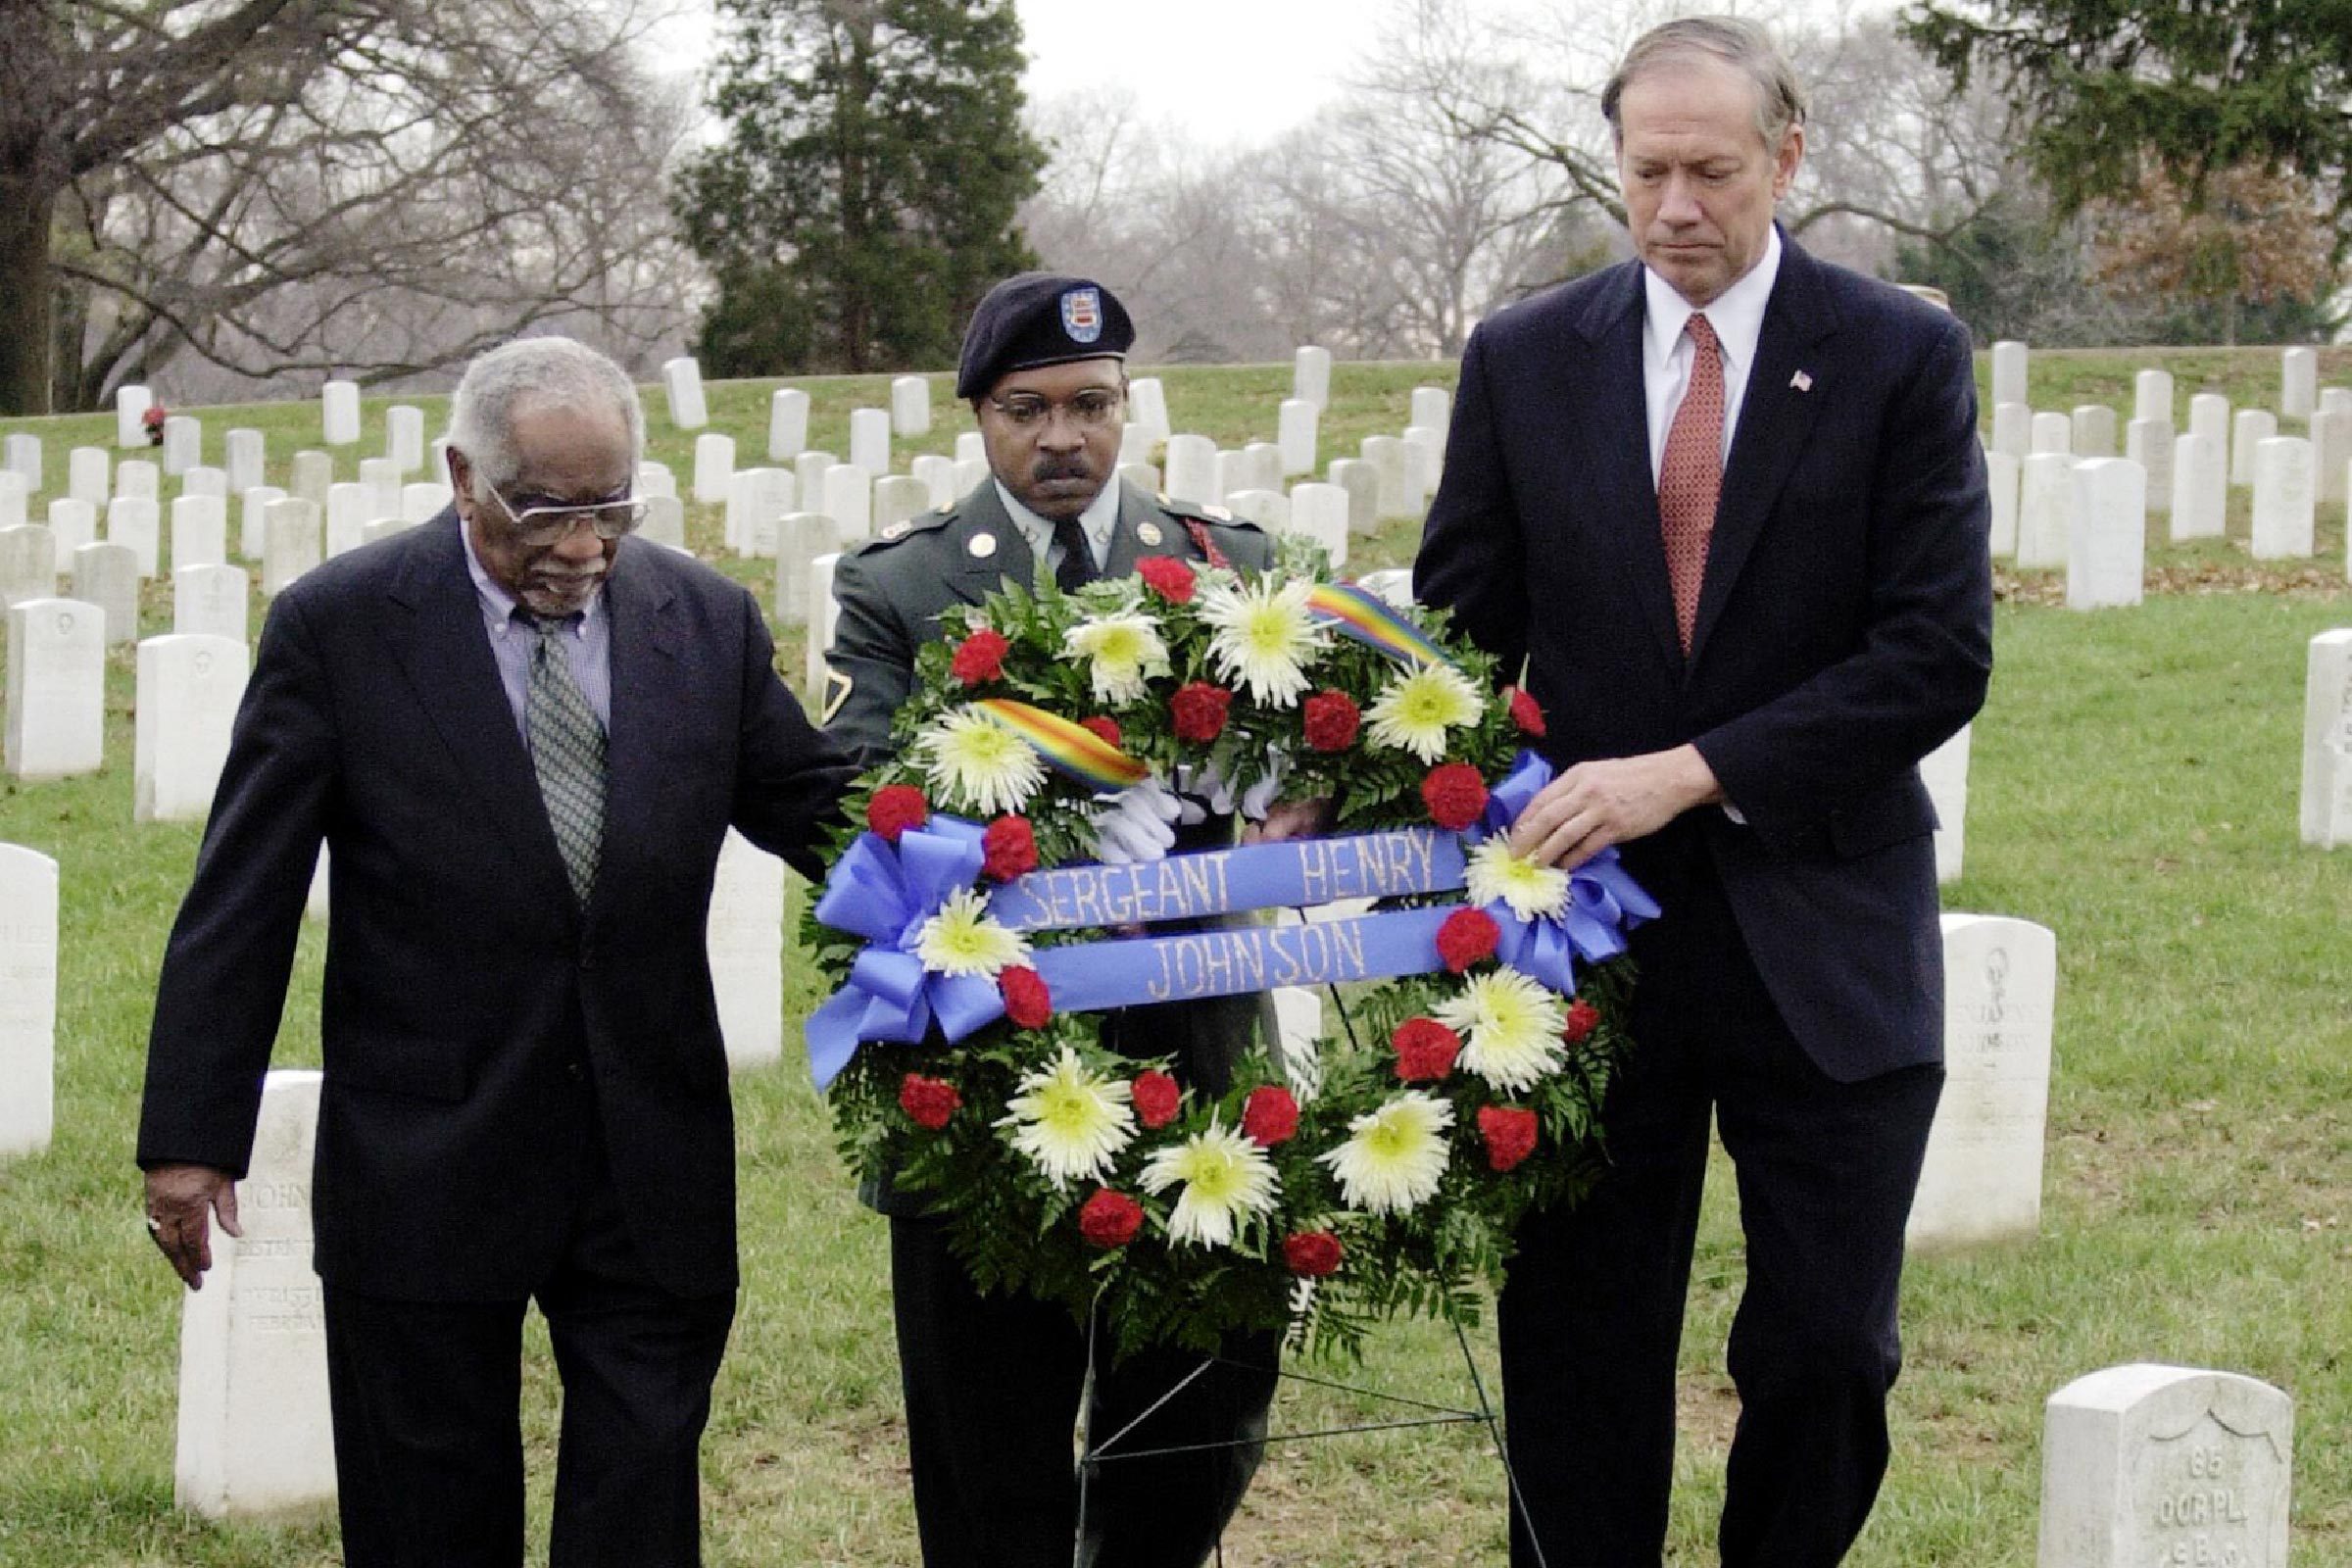 PATAKI JOHNSON JILLIARD New York Gov. George Pataki, right, along with Herman Johnson, left, and Pfc Gerald Jilliard of the New York Army National Guard, prepare to place a wreath at the gravesite of Johnson's father, World War I hero Sgt. Henry Johnson at Arlington National Cemetery in Arlington, Va. . The wreath laying was to honor Sgt. Johnson, a famed member of the Harlem Hellfighters